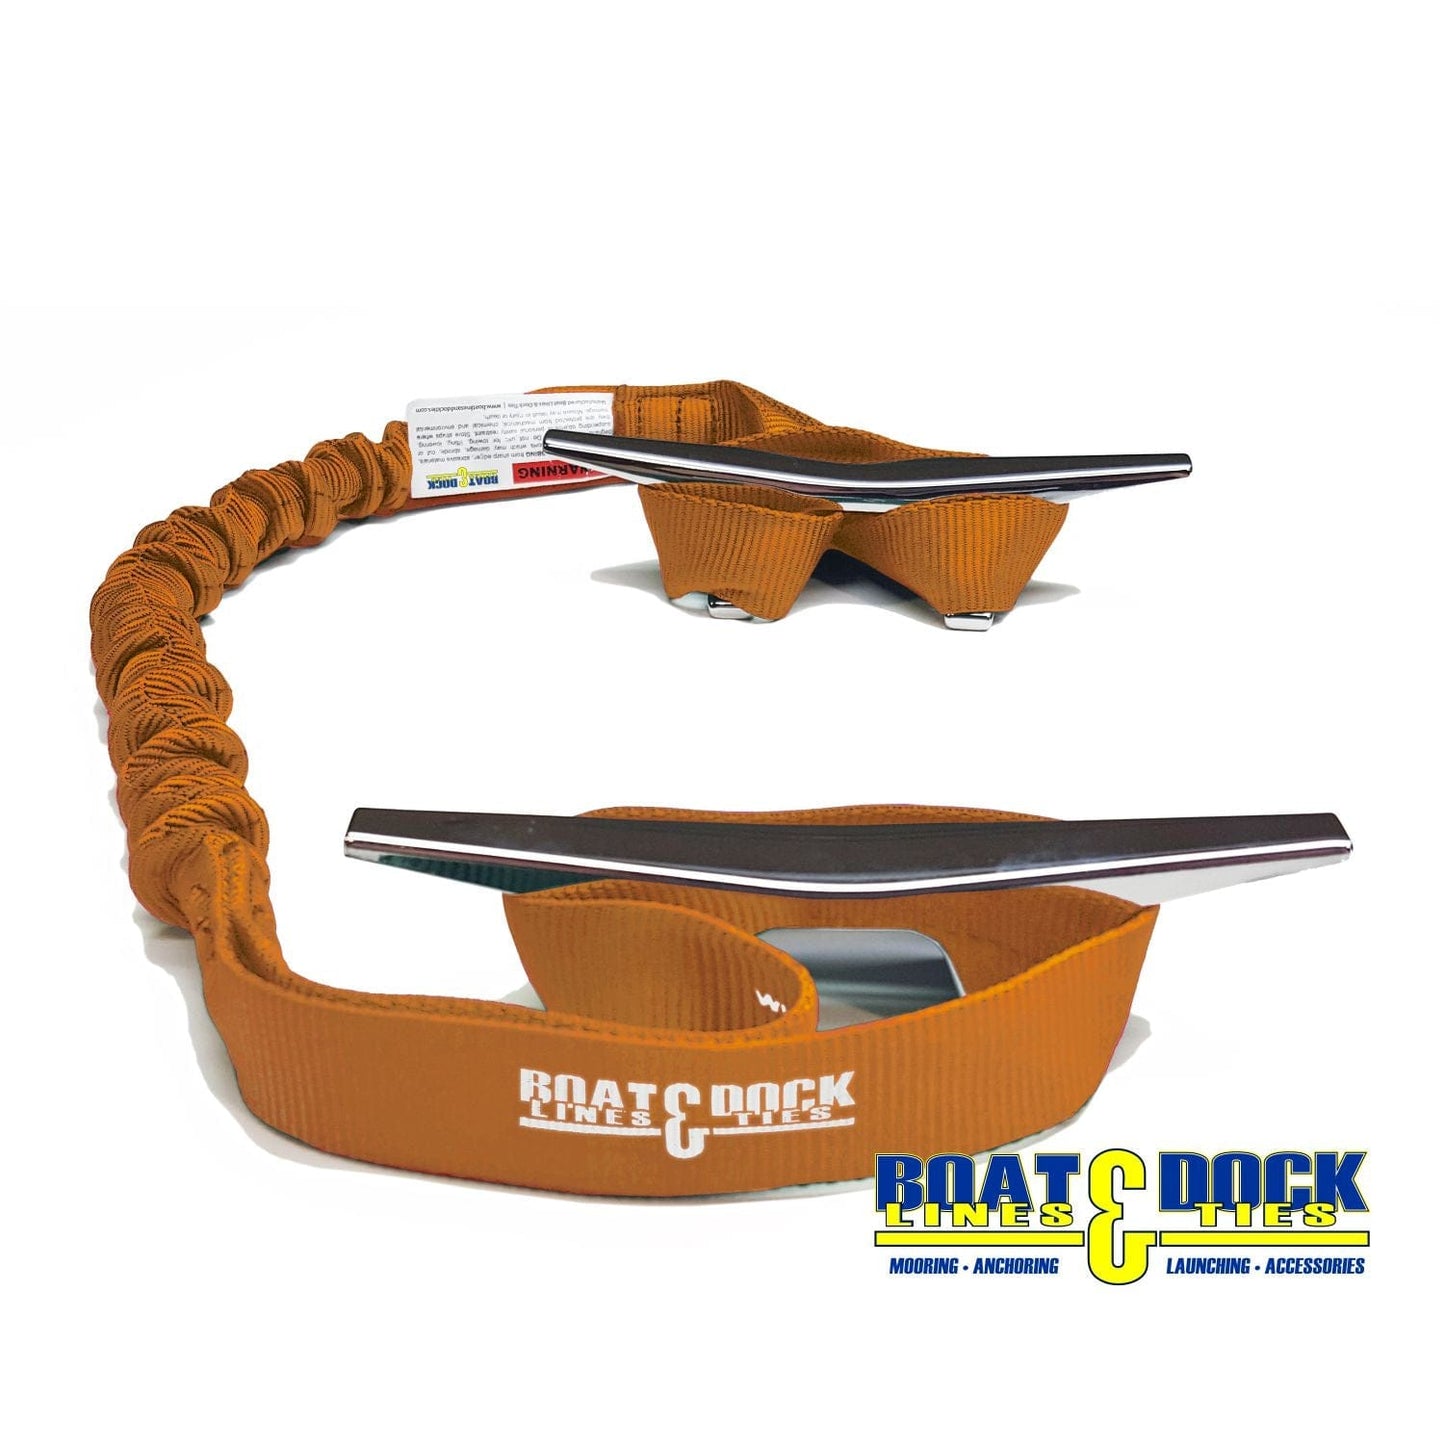 Bungee Dock Lines - 9-Inch Loop Ends, Made in USA, - Pack of 2 - Boat Lines & Dock Ties Boat Lines & Dock Ties Orange / 30 Inches